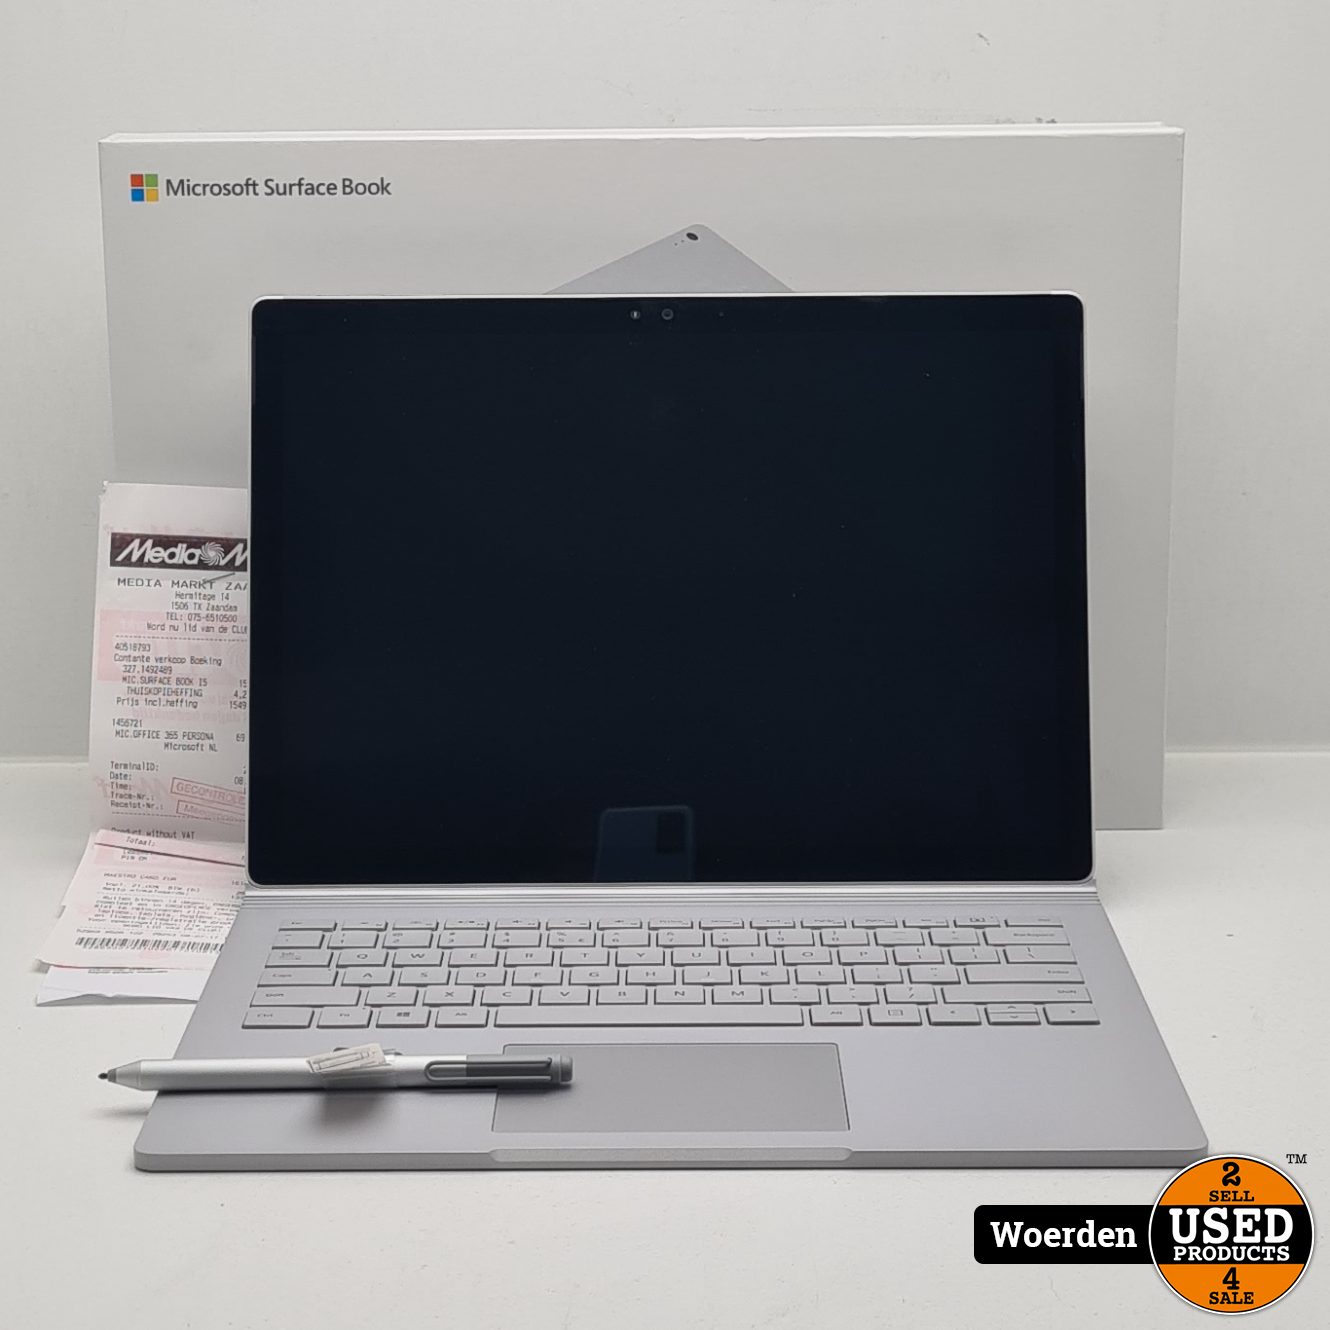 microsoft Microsoft Surface Book Go i5 | 8GB 128GB SSD | Incl. Pen | Met  Garantie - Used Products Woerden